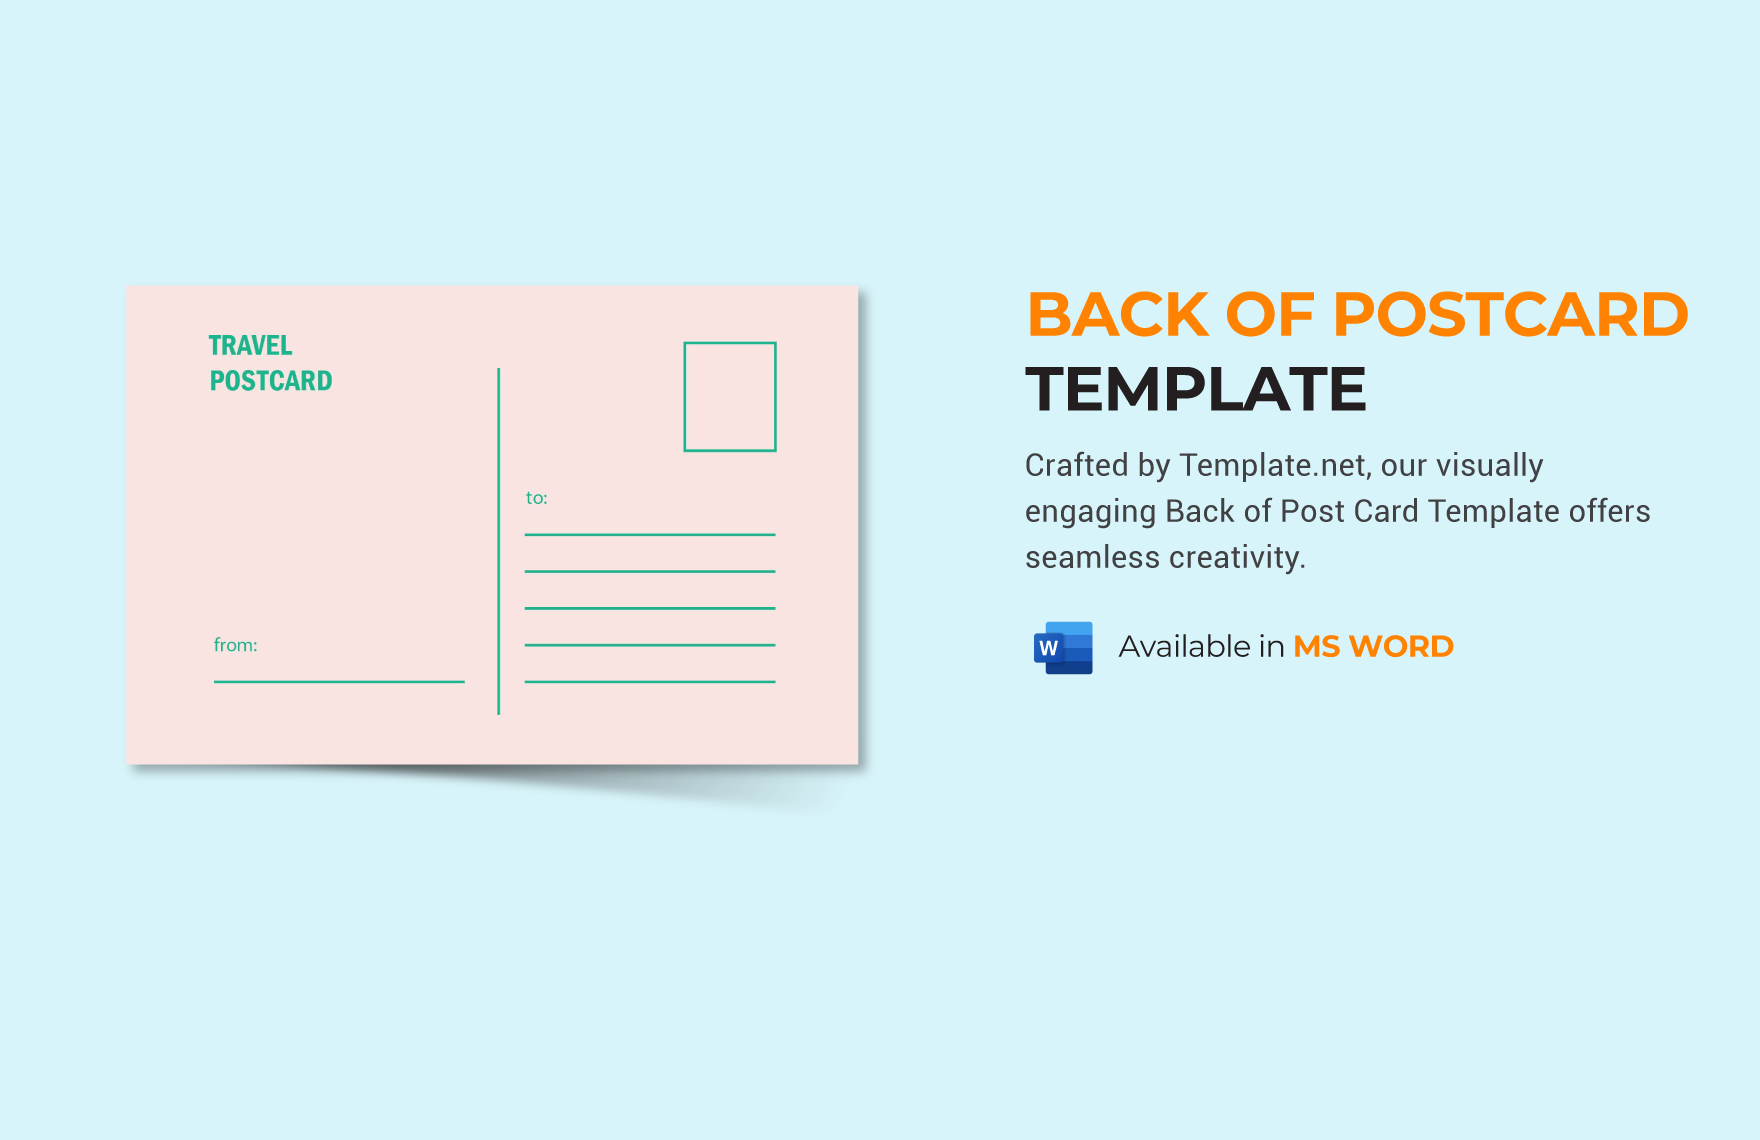 Back of Postcard Template